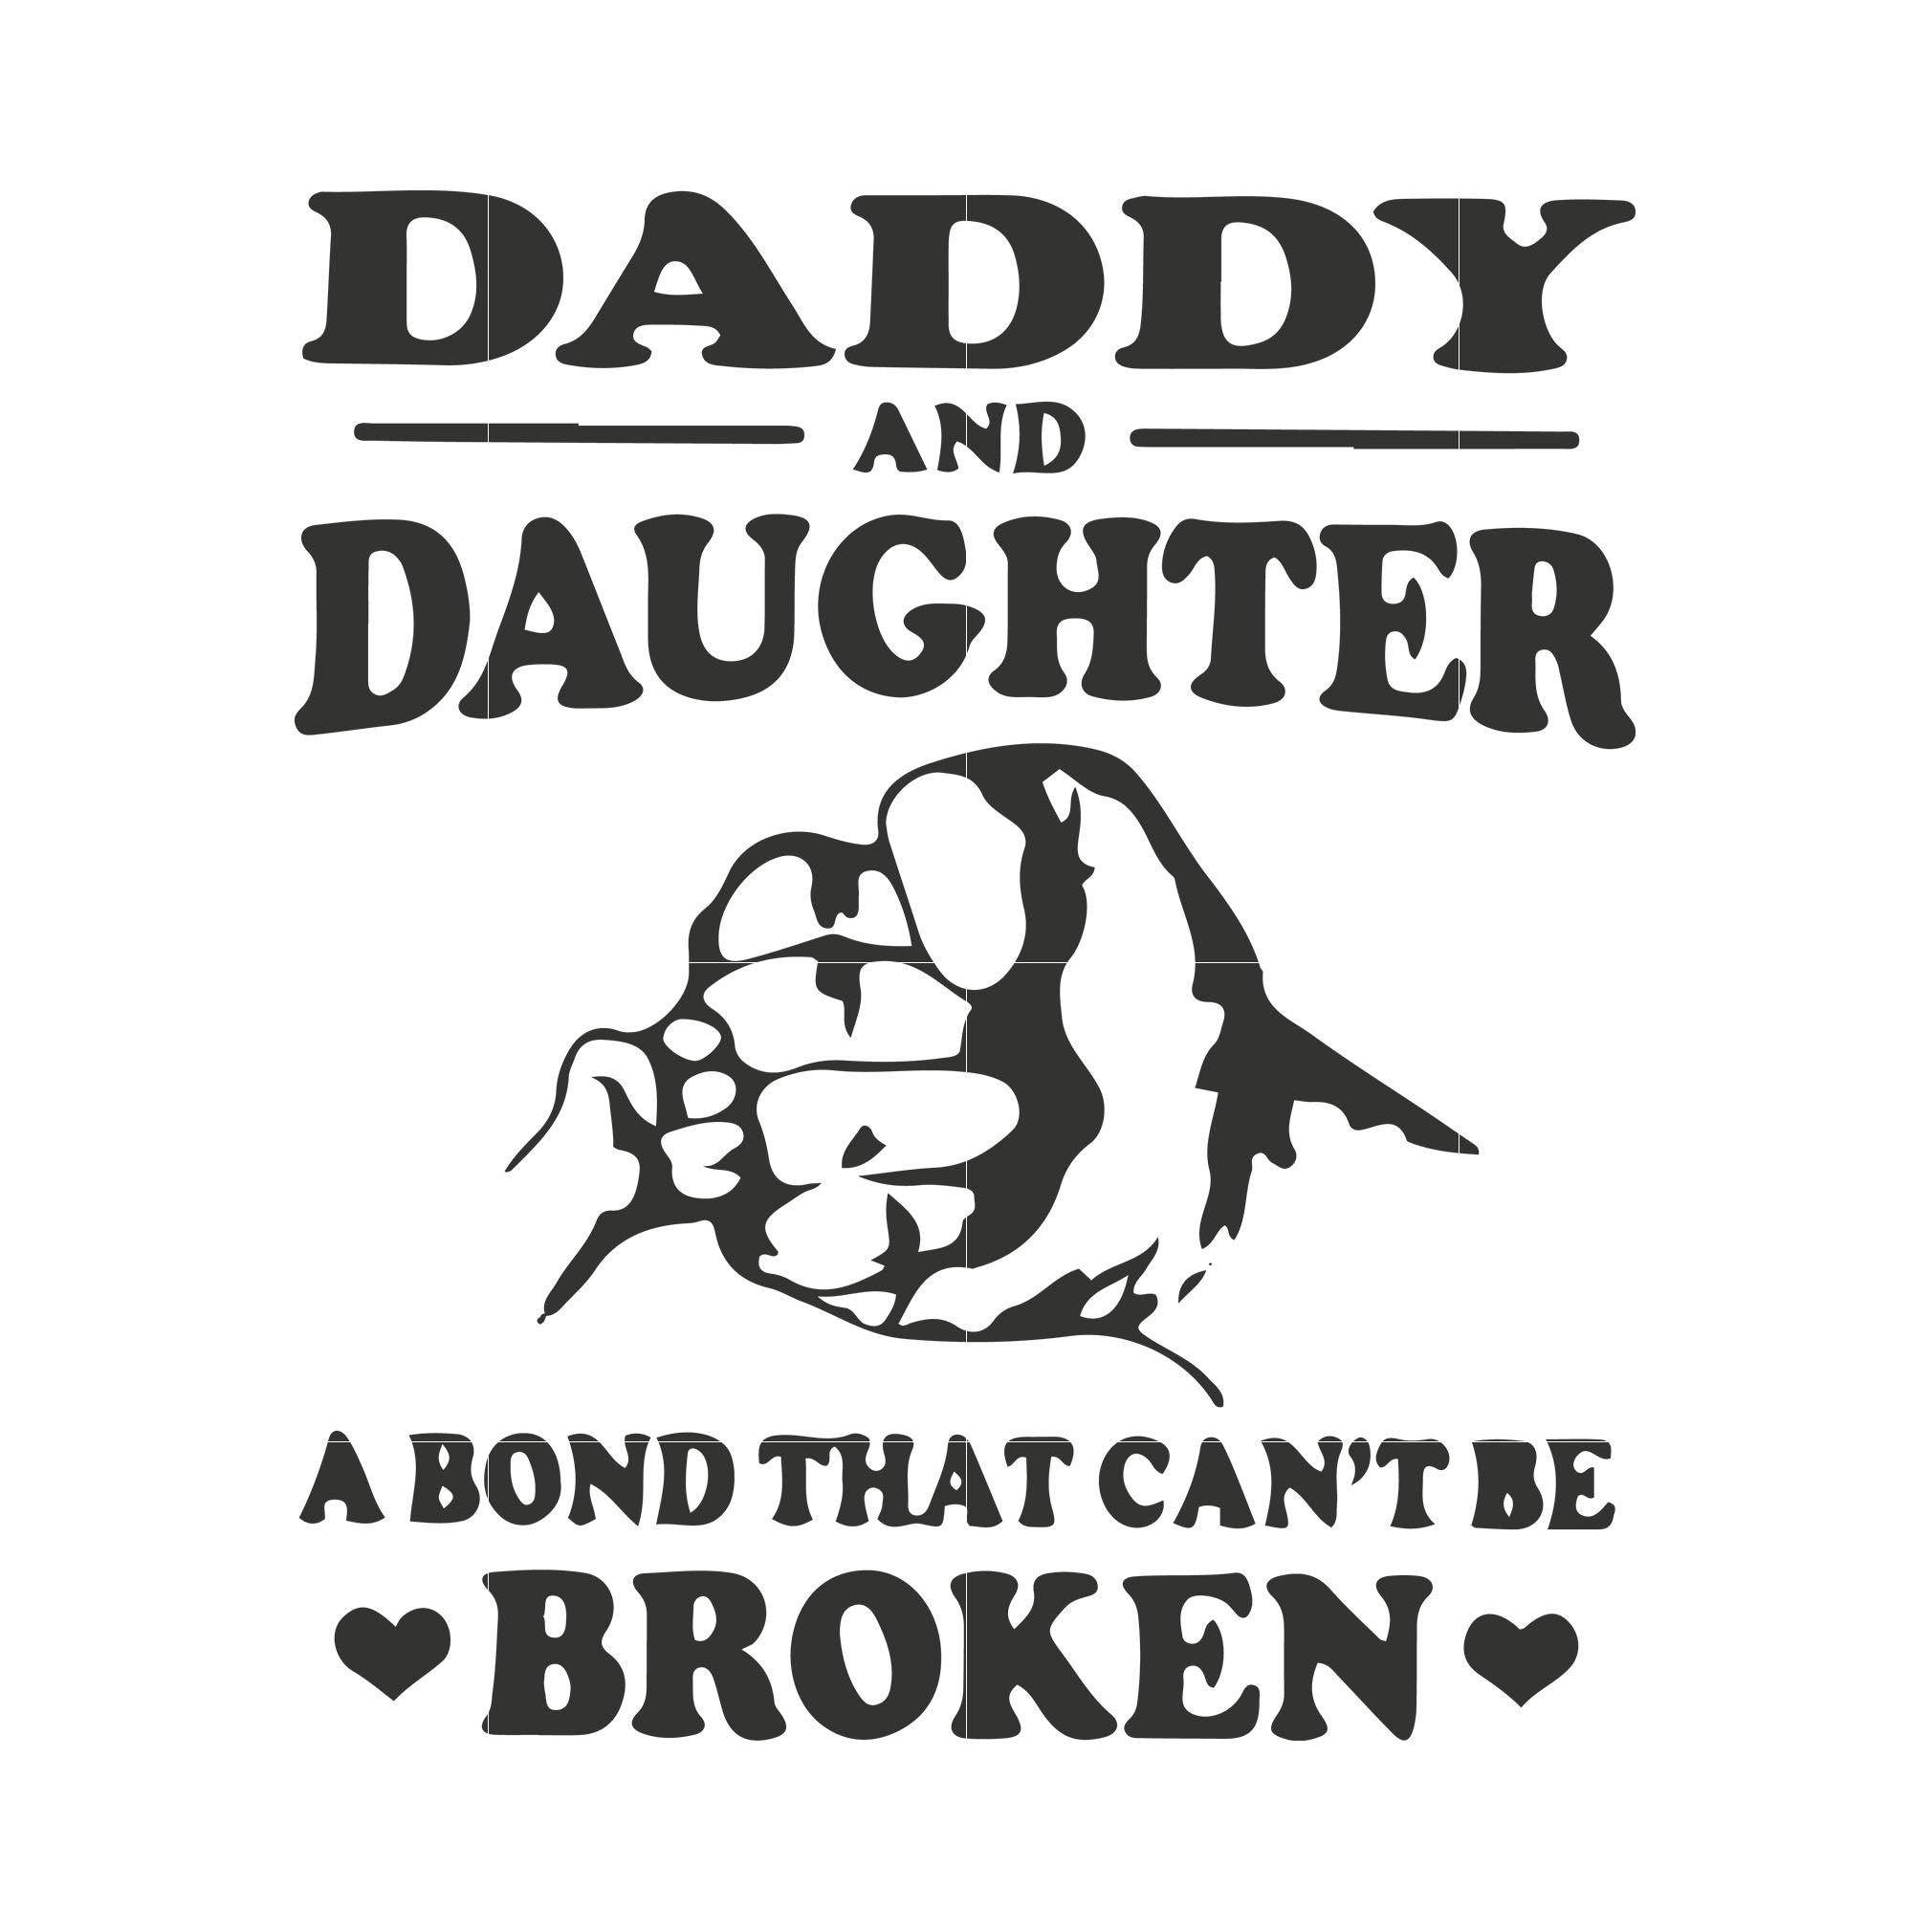 Daddy And Daughter A Bond That Can T Be Broken Svg Dxf Eps Png Digita Svgtrending